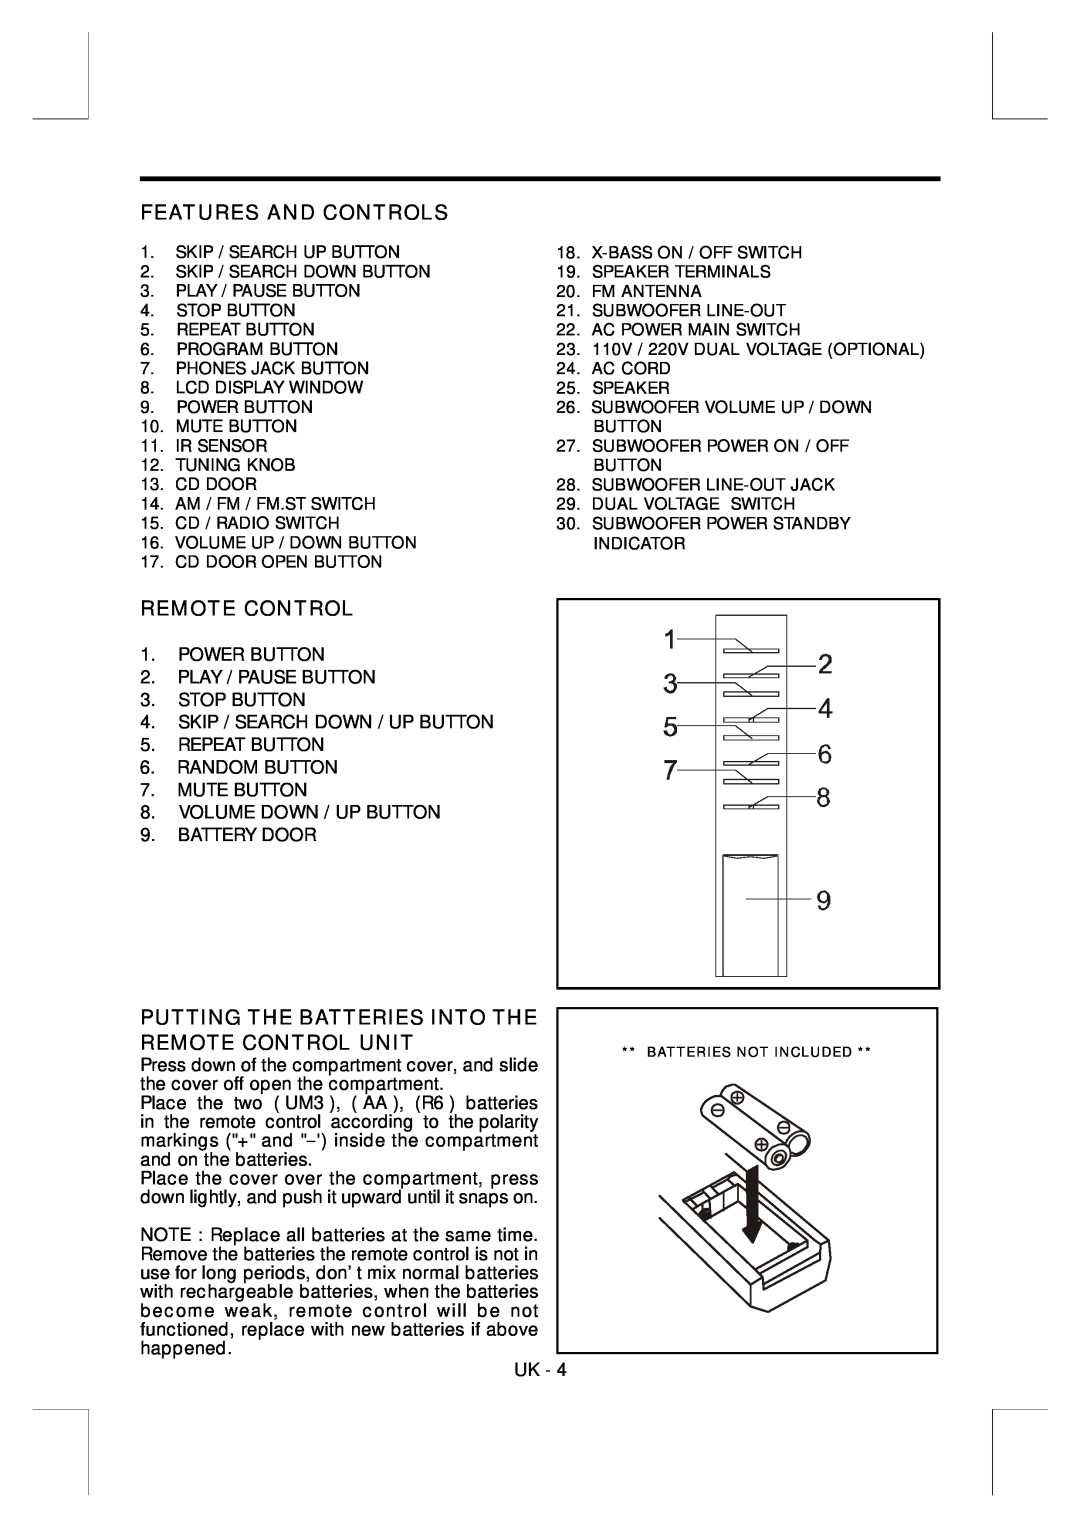 Sylvania SR-748 instruction manual Features And Controls, Putting The Batteries Into The, Remote Control Unit 